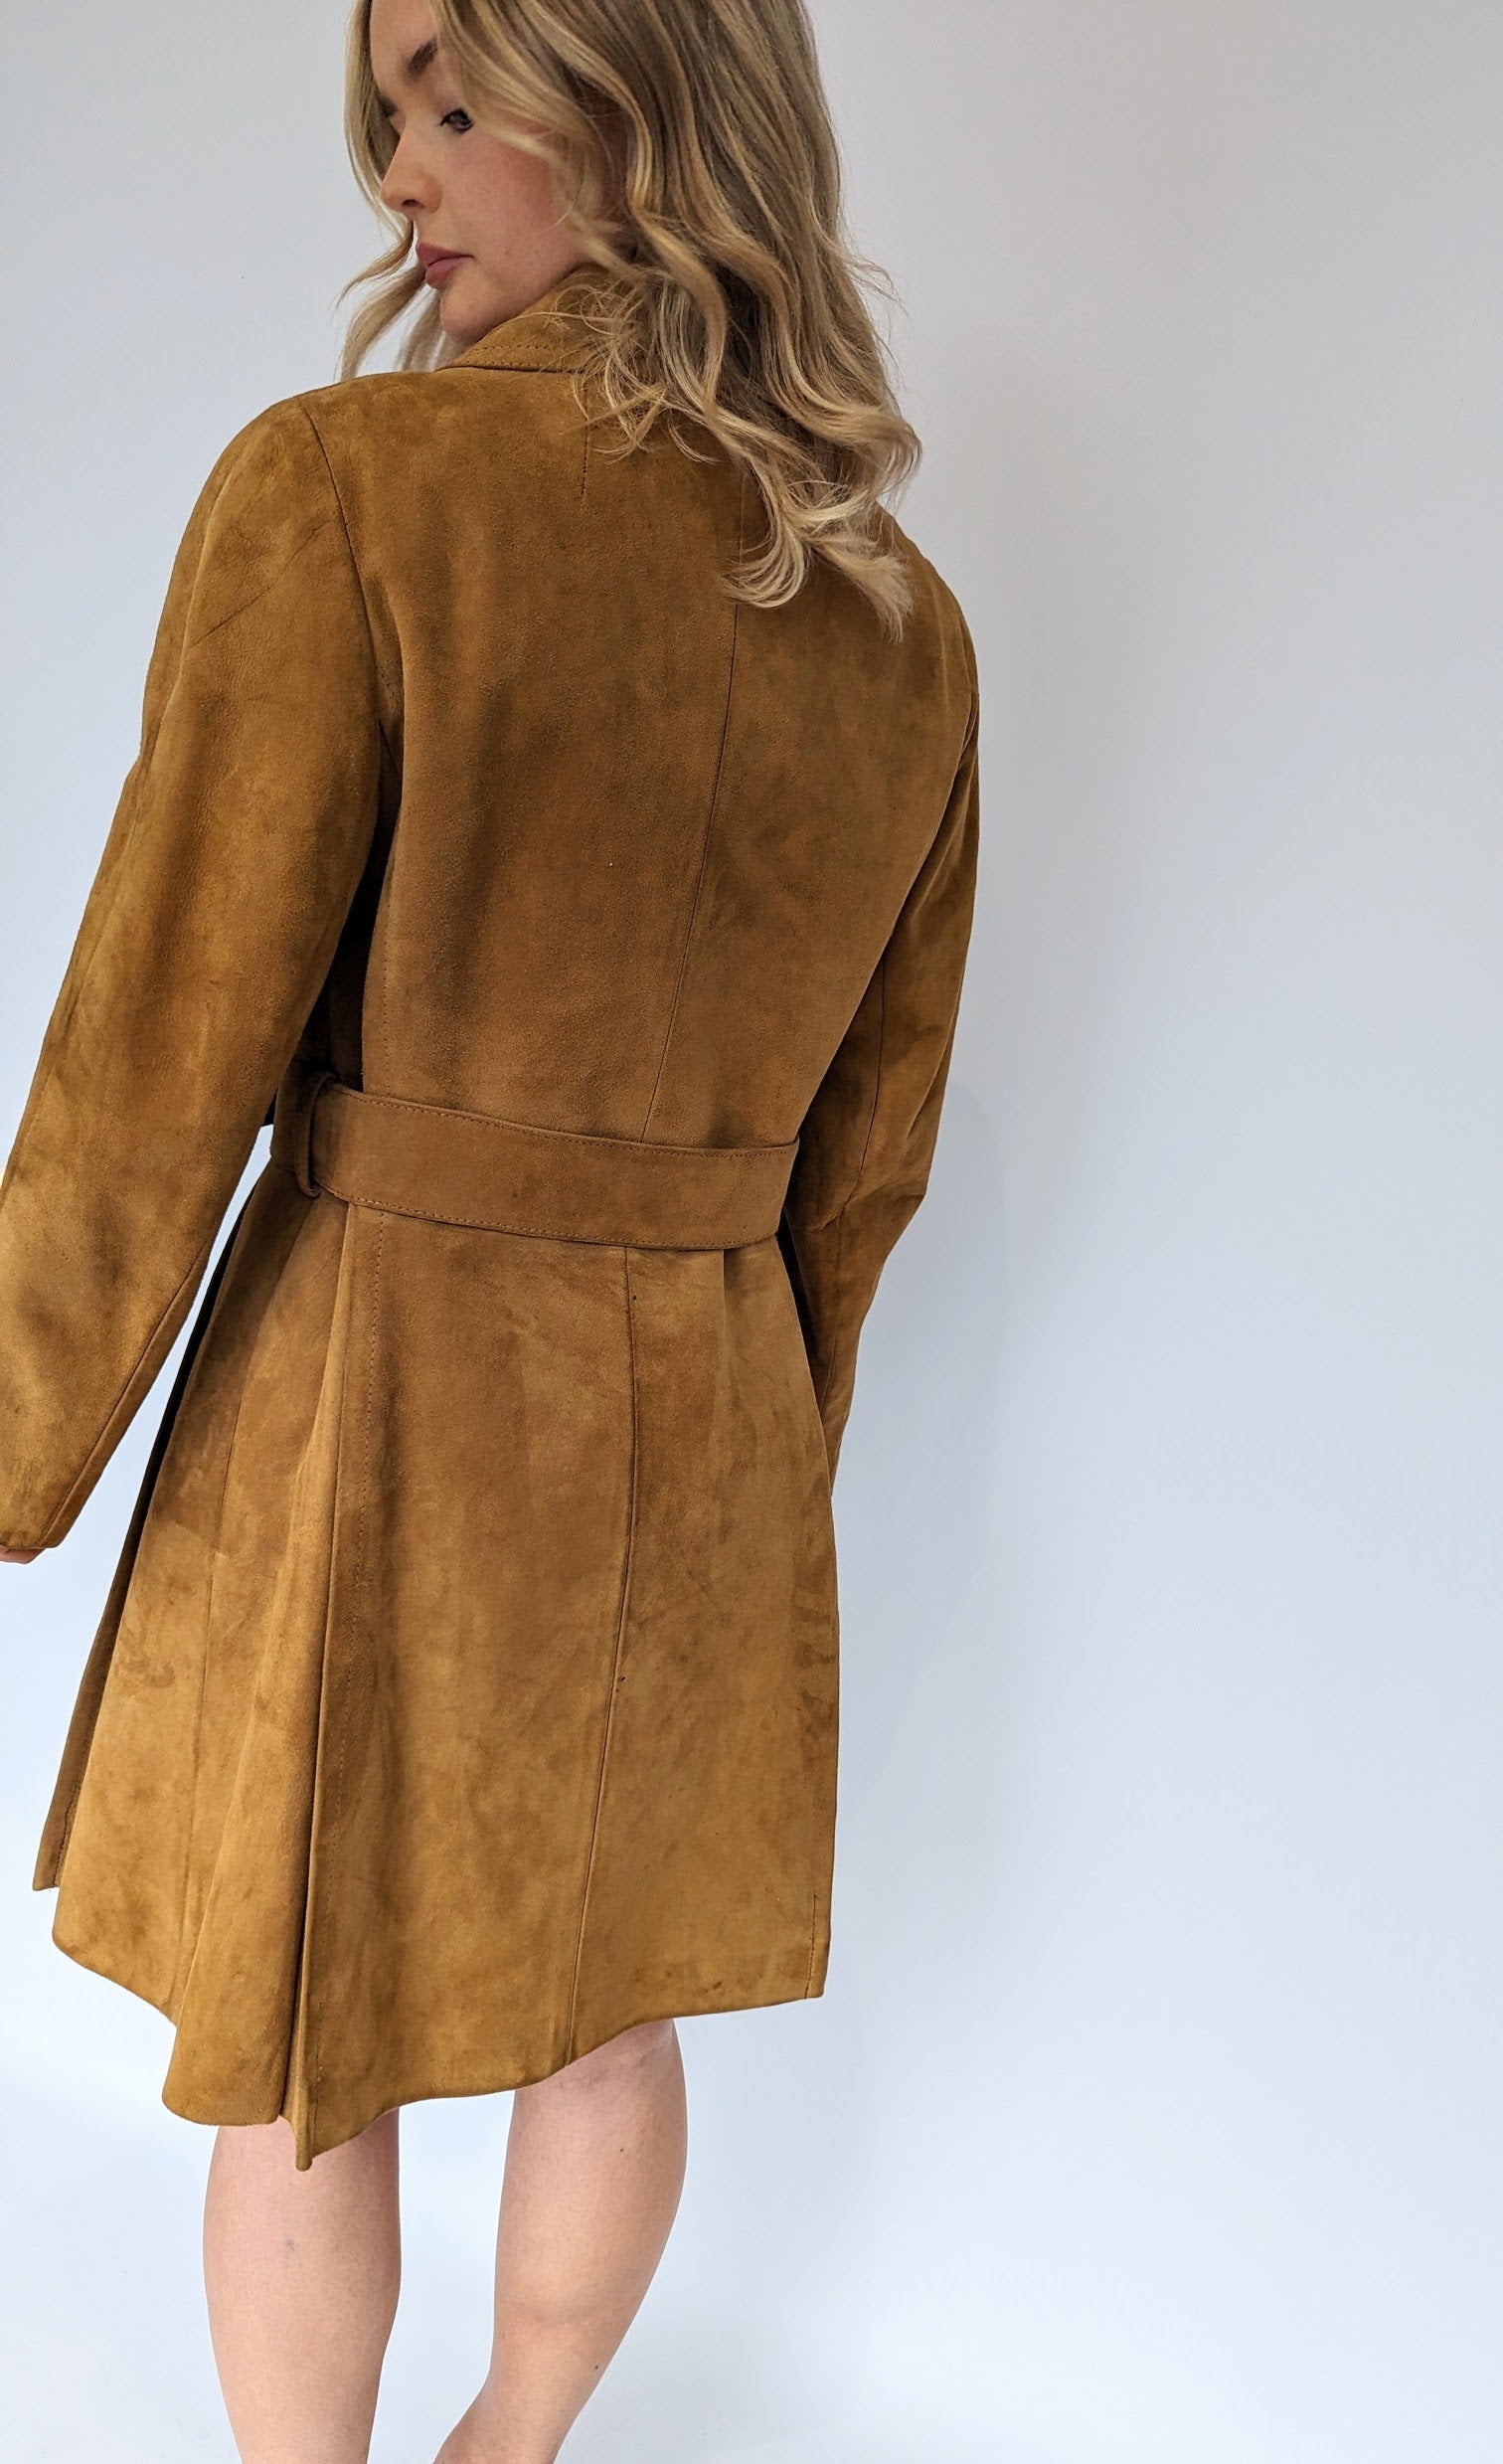 back of 70s long tan suede ladies coat with gold buttons